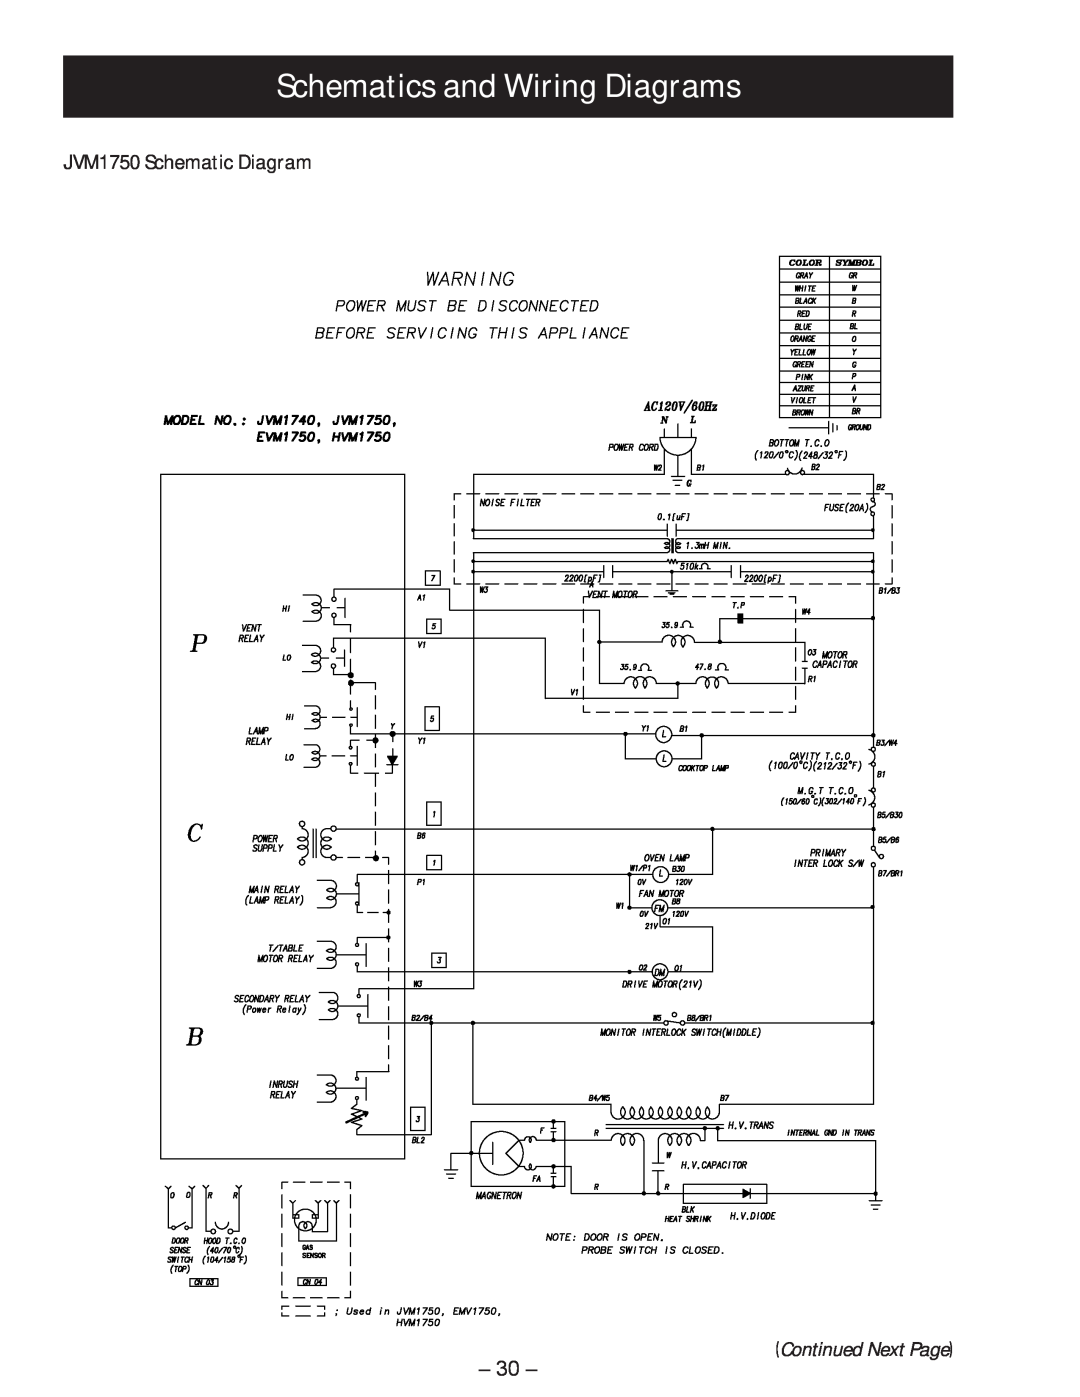 GE manual Schematics and Wiring Diagrams, JVM1750 Schematic Diagram, Continued Next Page 